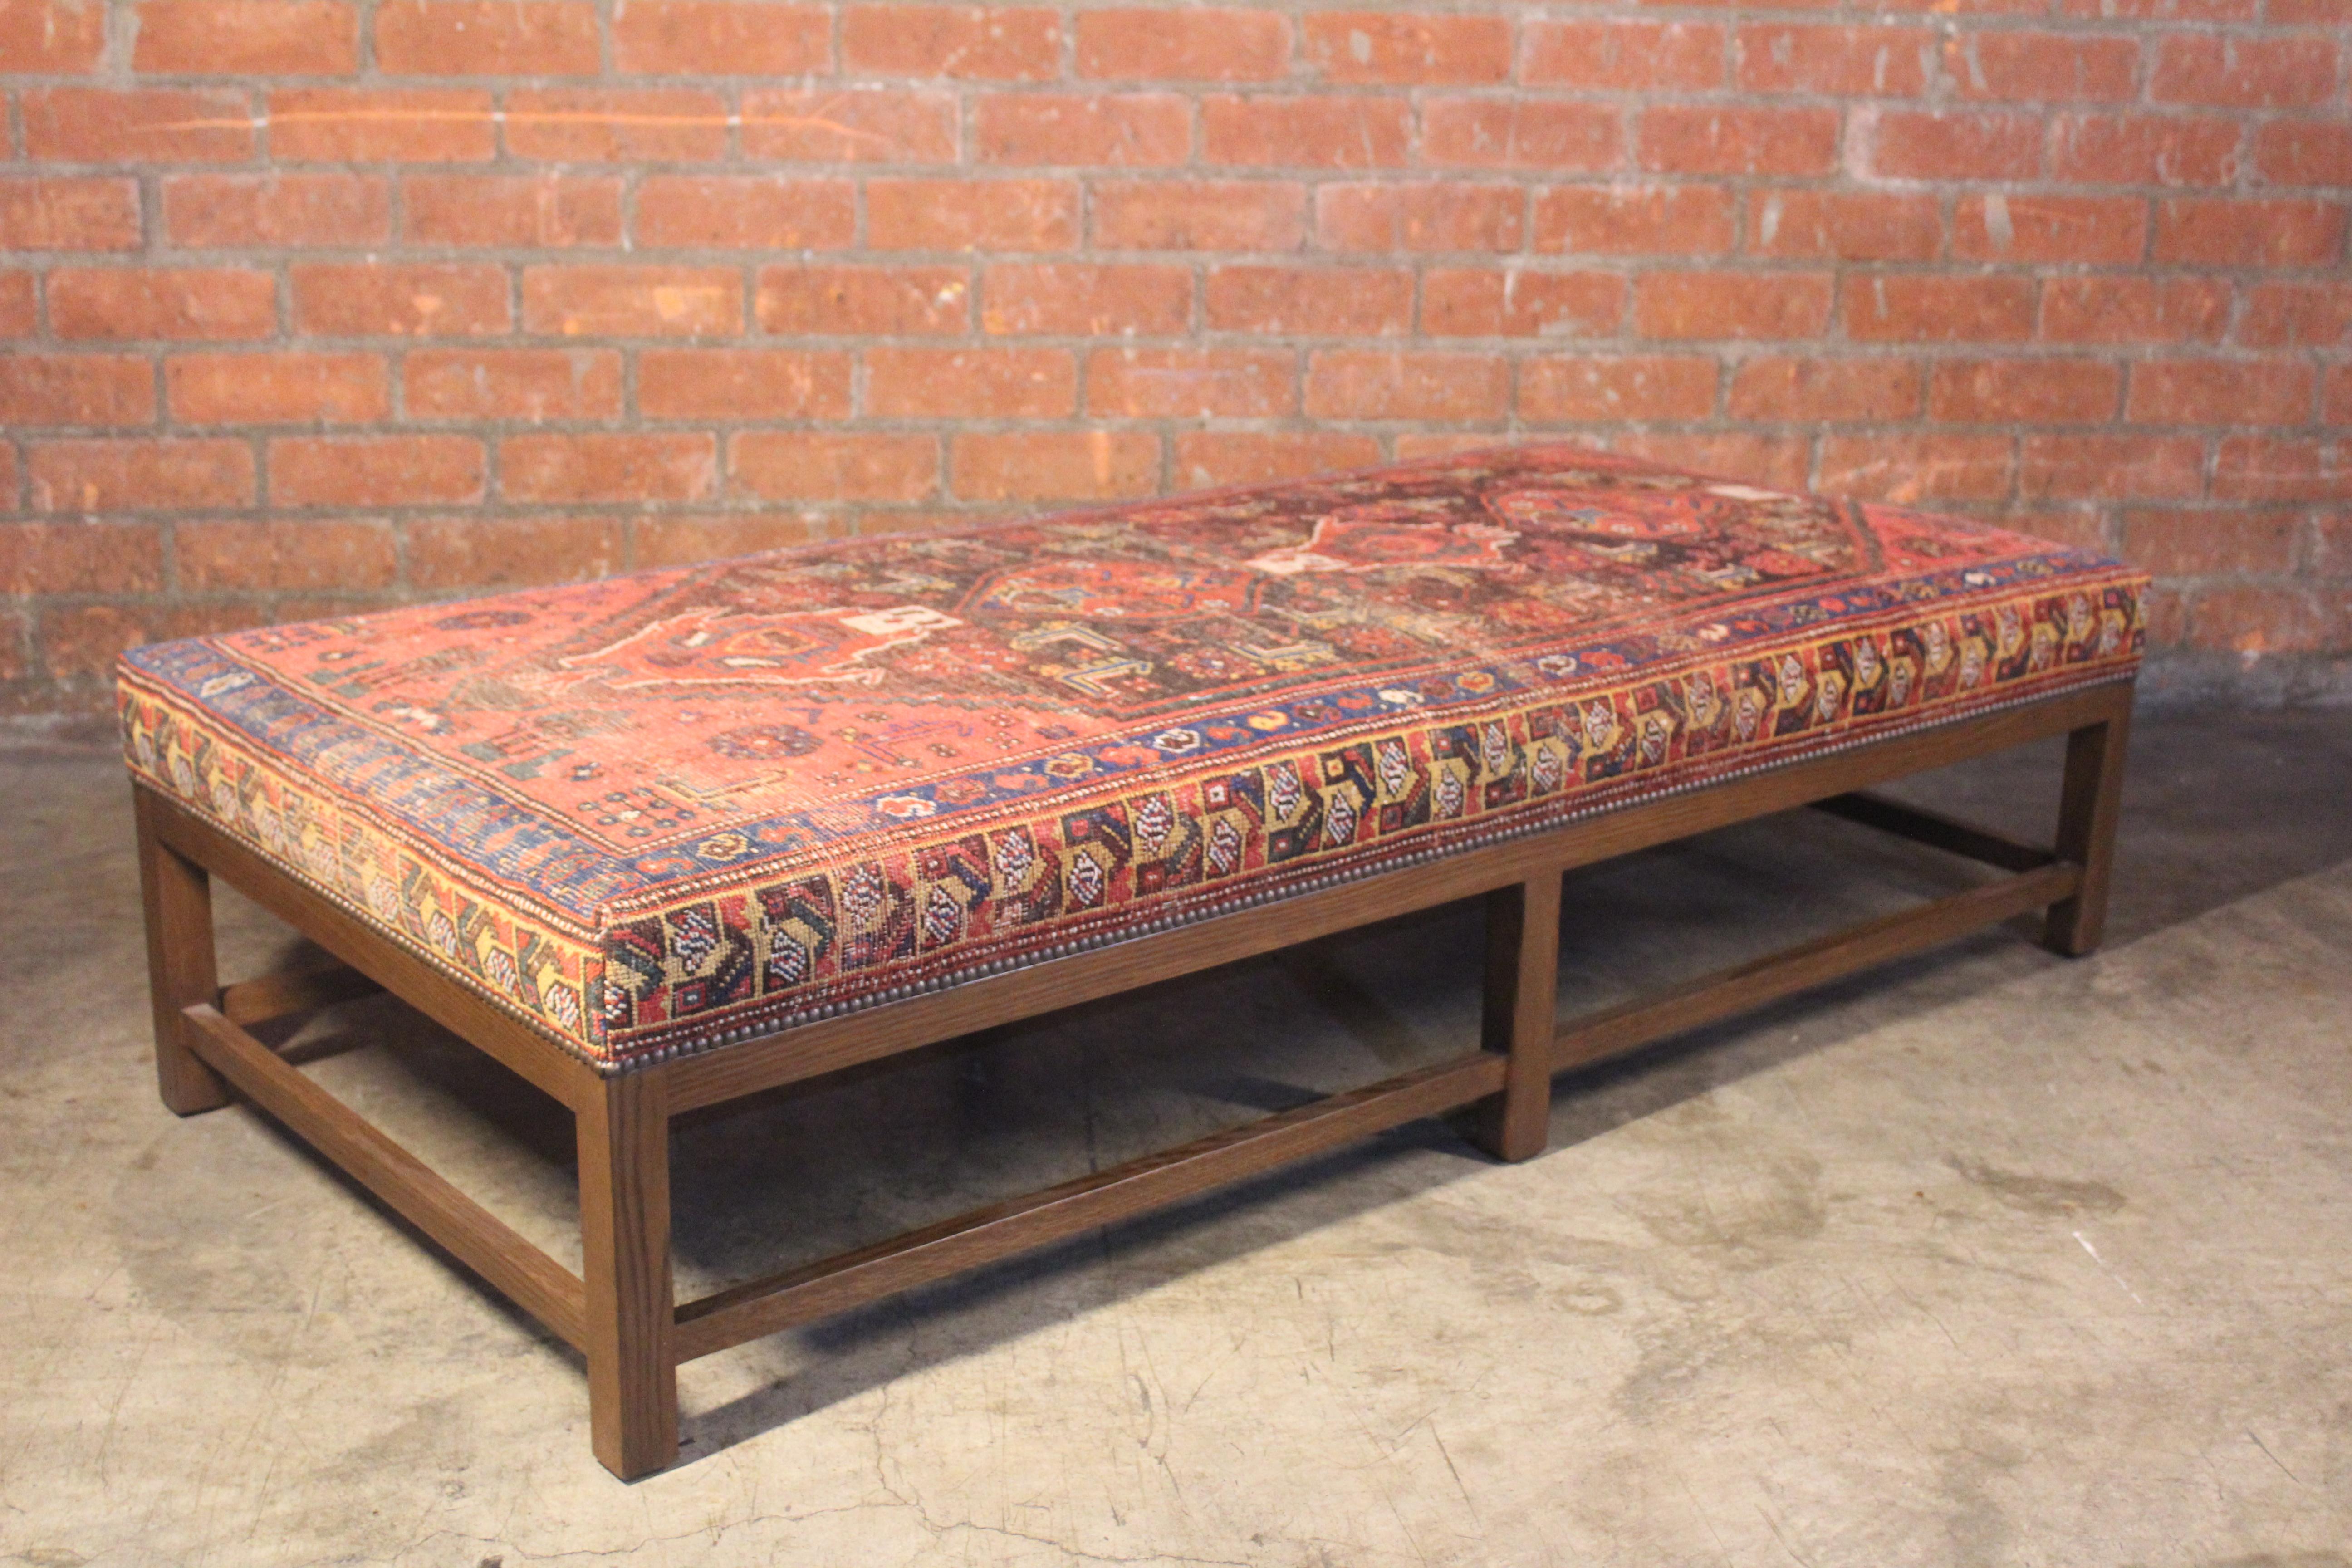 Wool Lexington Ottoman Upholstered in a Vintage Turkish Rug